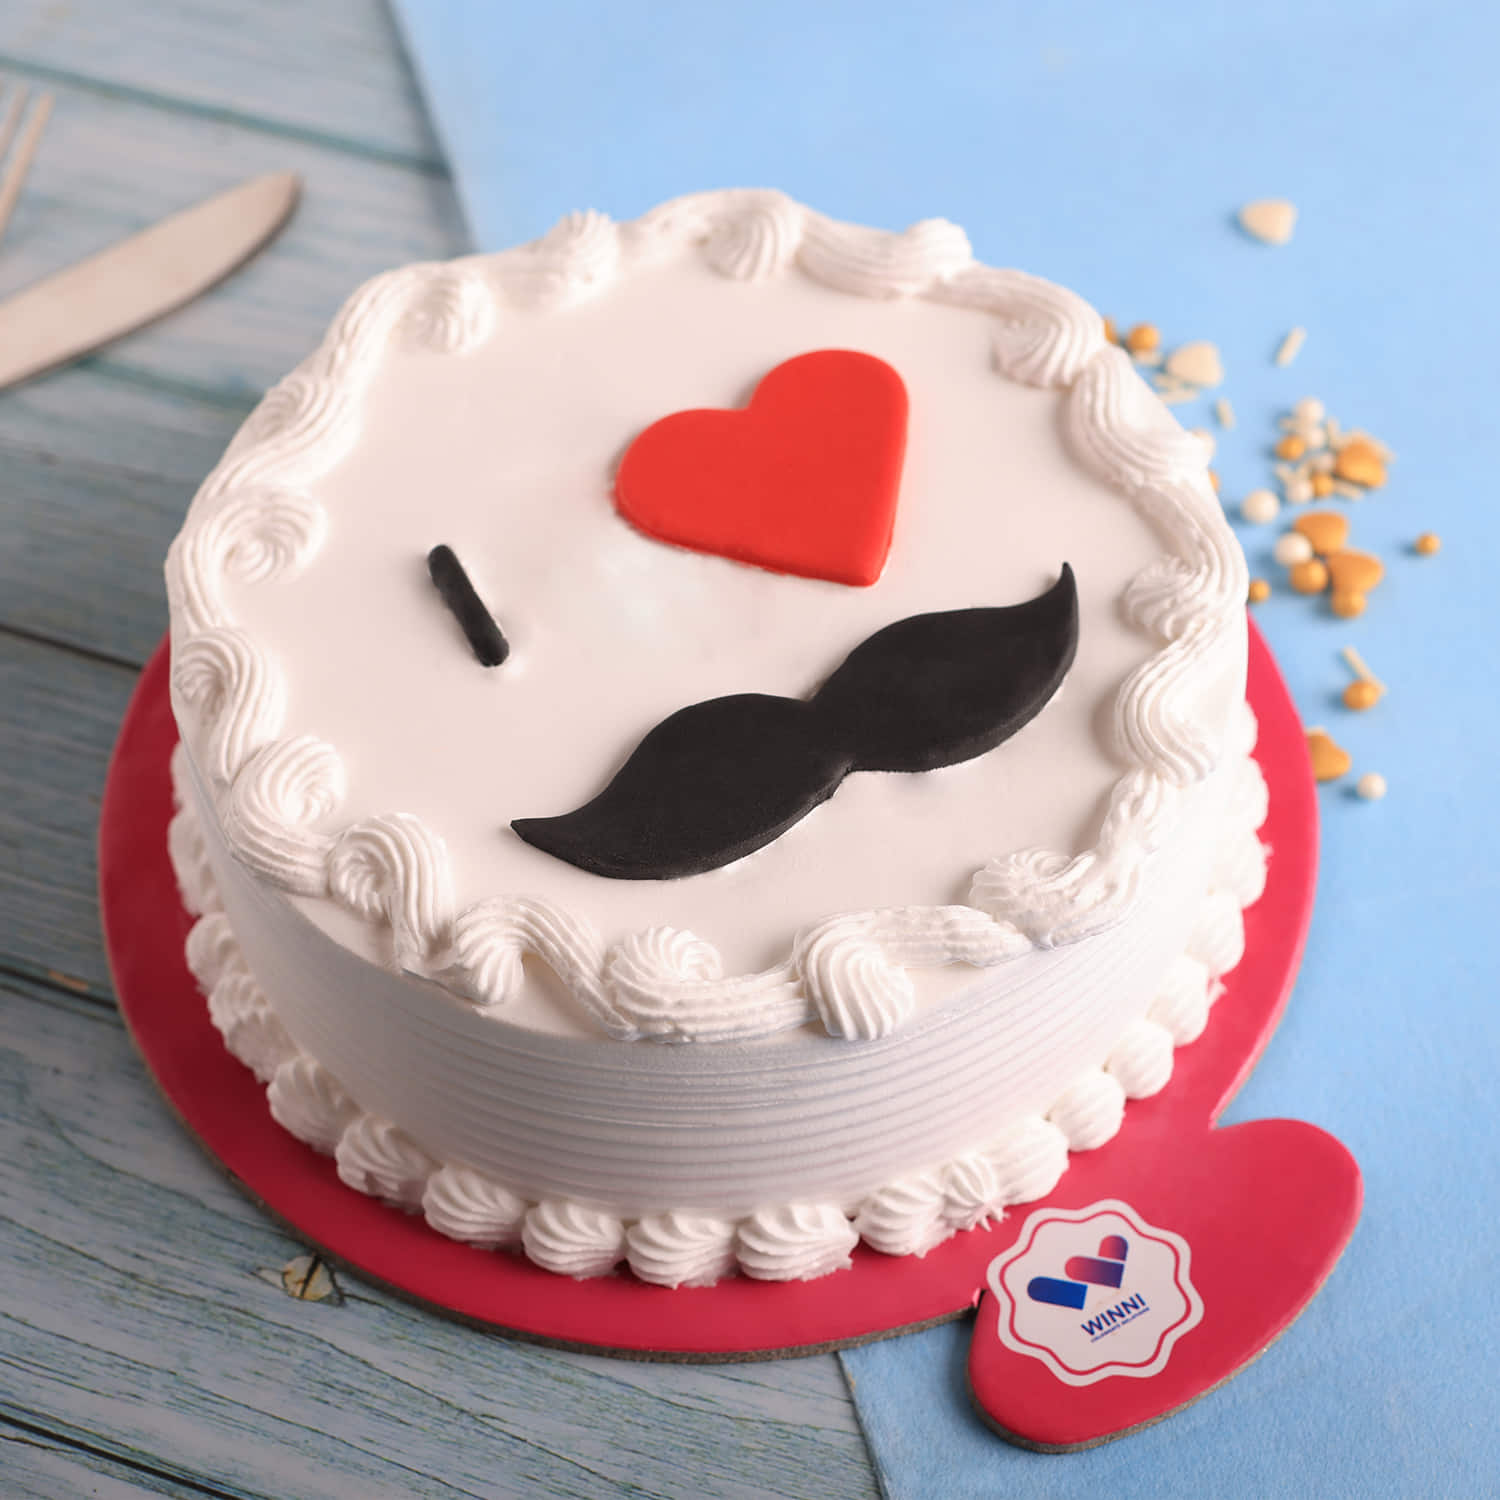 Brother's Day Special, 24x7 Home delivery of Cake in Ghaziabad Sector-18,  Ghaziabad